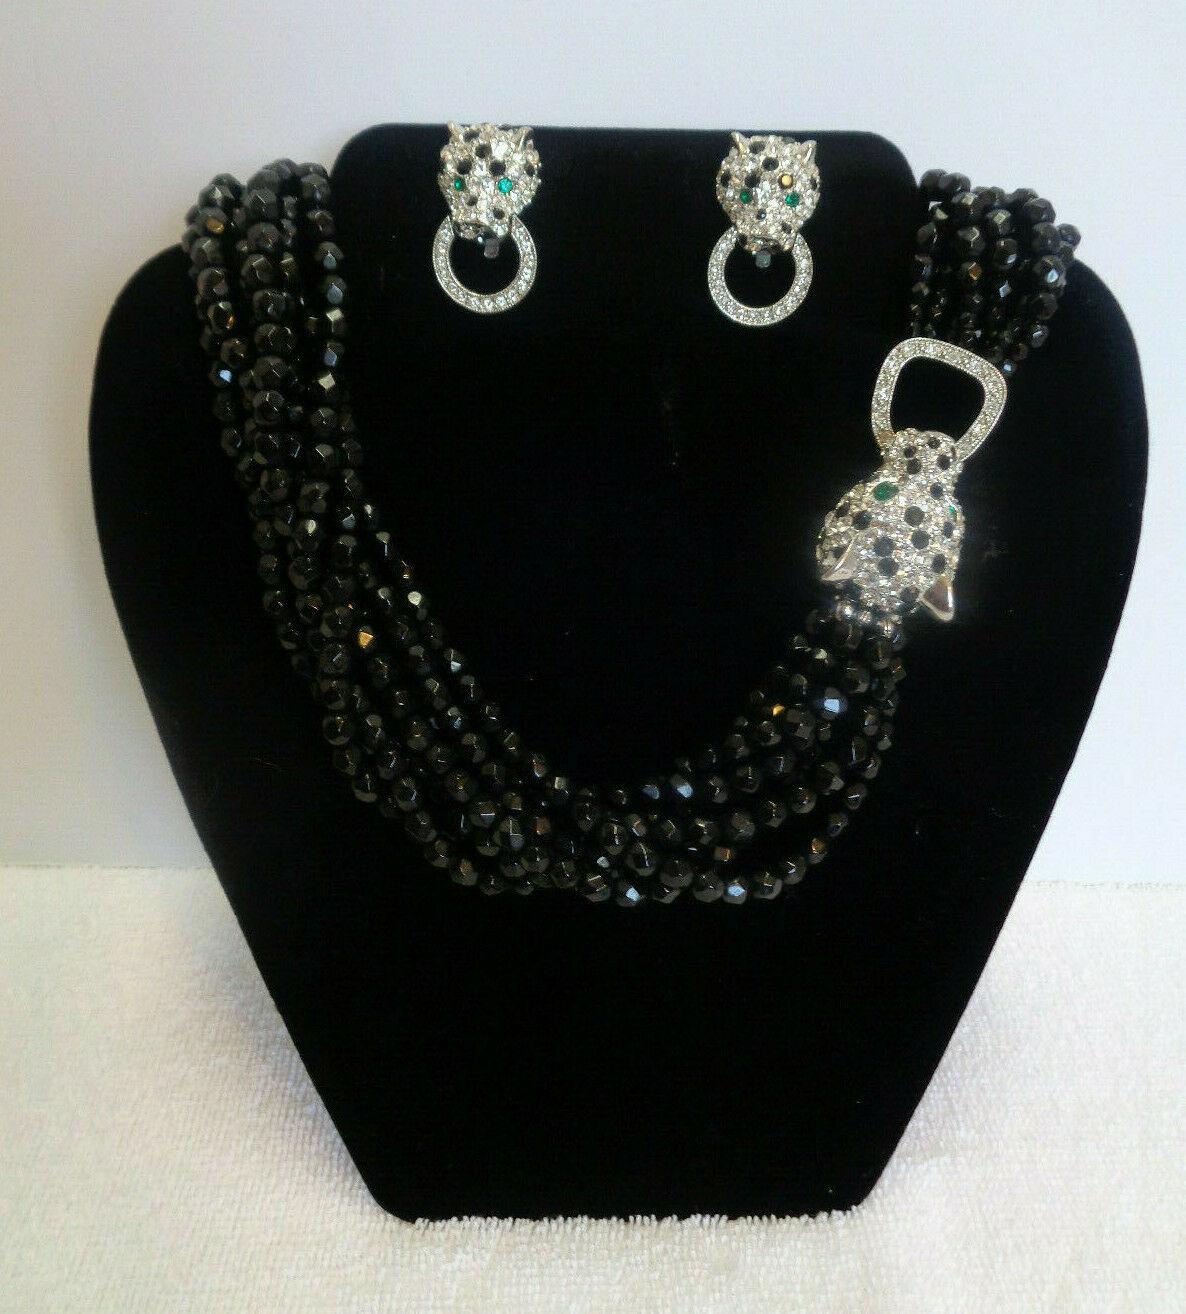 Simply Beautiful Designer Multi Strand Black Jet Necklace featuring a Sparkling Rhinestone encrusted Leopard/Panther front closure and matching Earrings by Kenneth Jay Lane. Silver tone mountings. The 8 strand necklace measures approx. 21